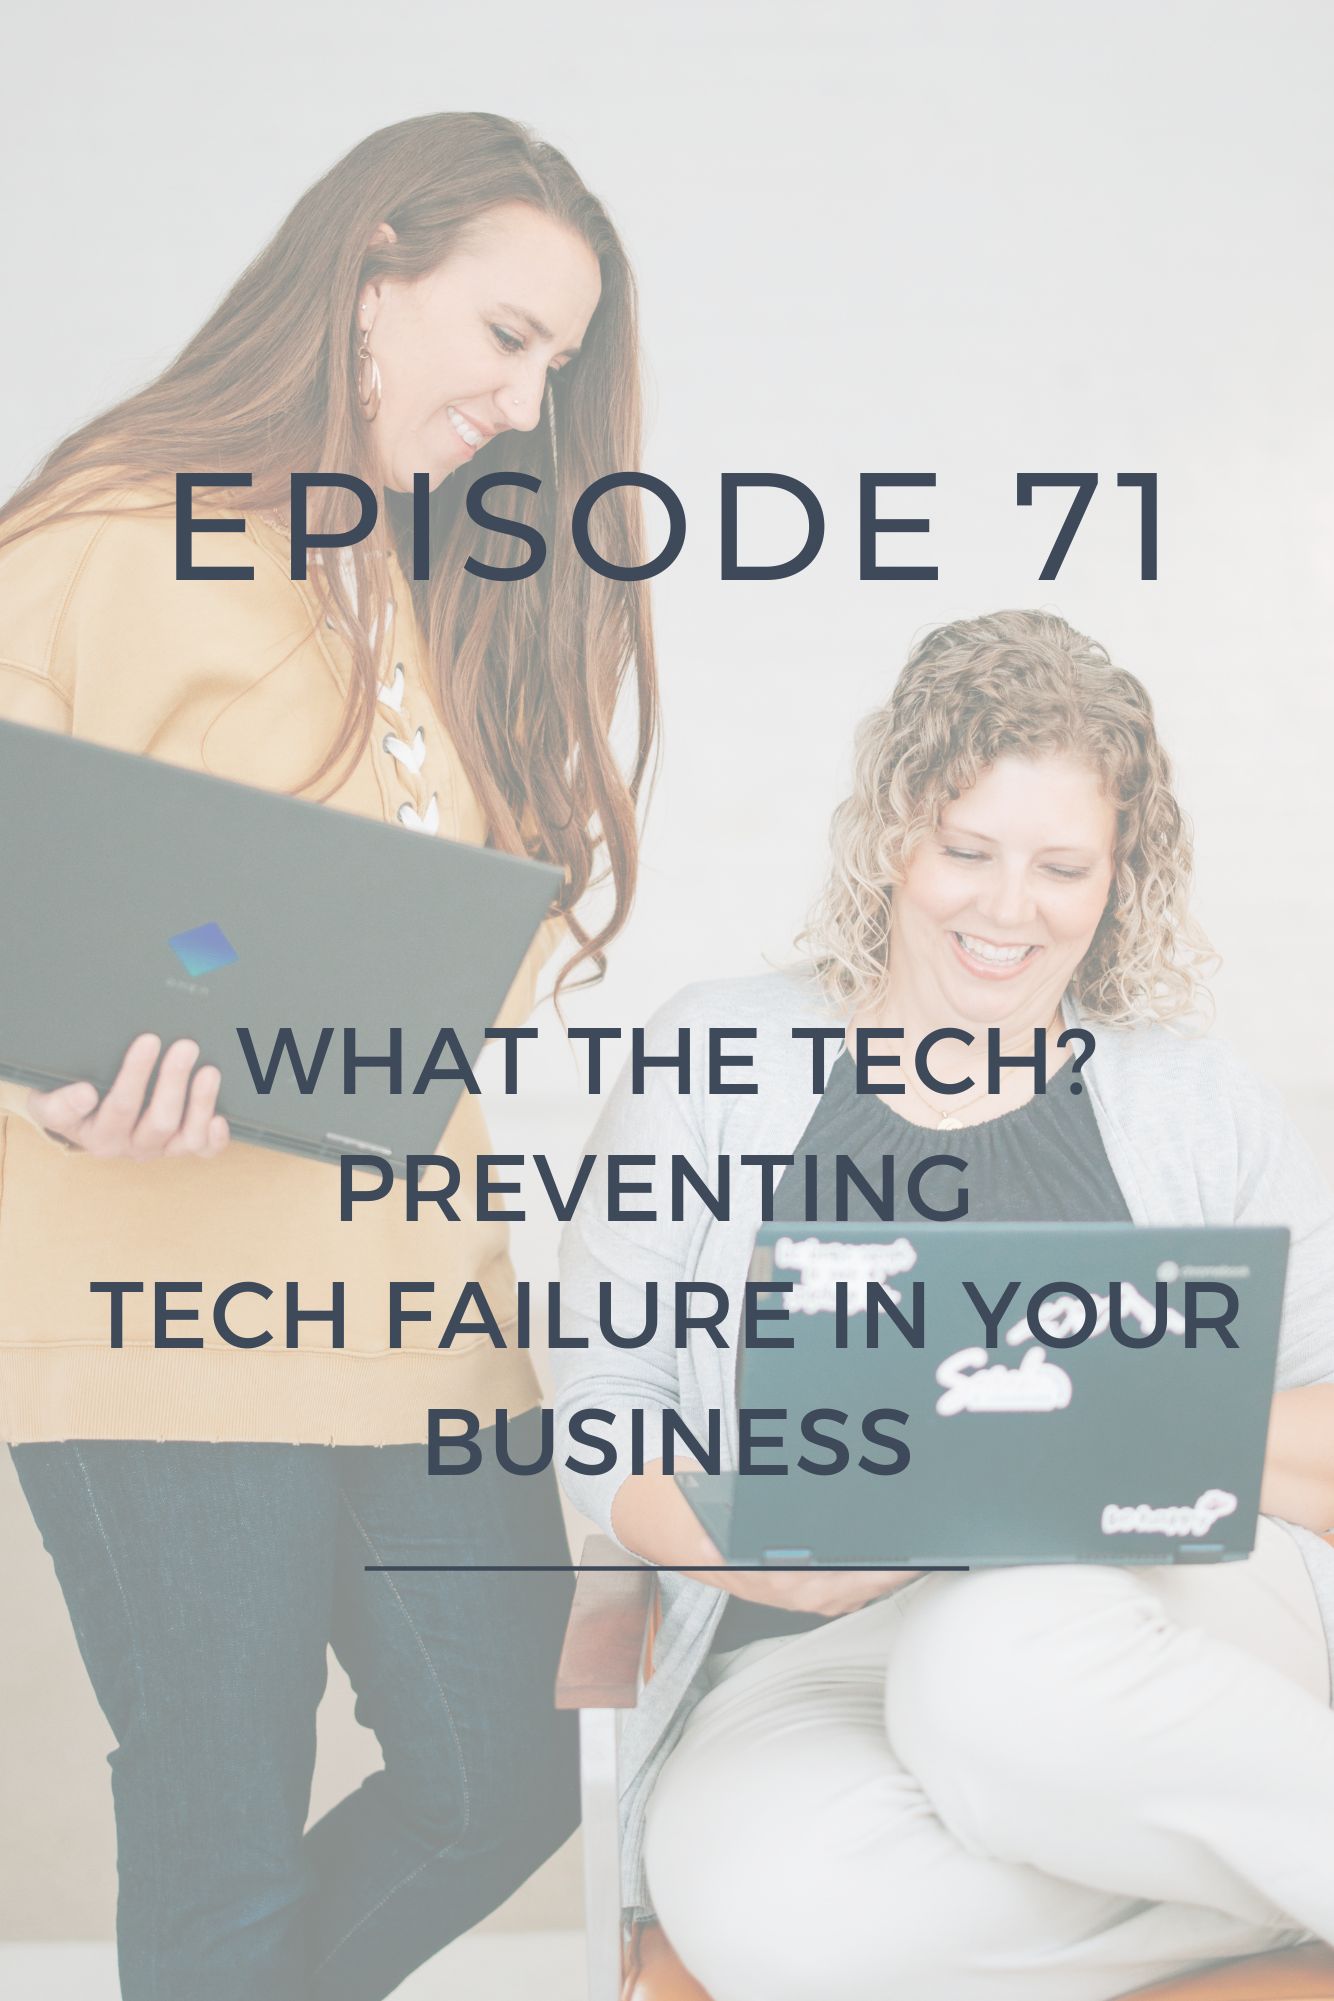 Two Christian women business owners looking at their computers and talking about their Christian womens business podcast about tech failure in their Christian business podcast.